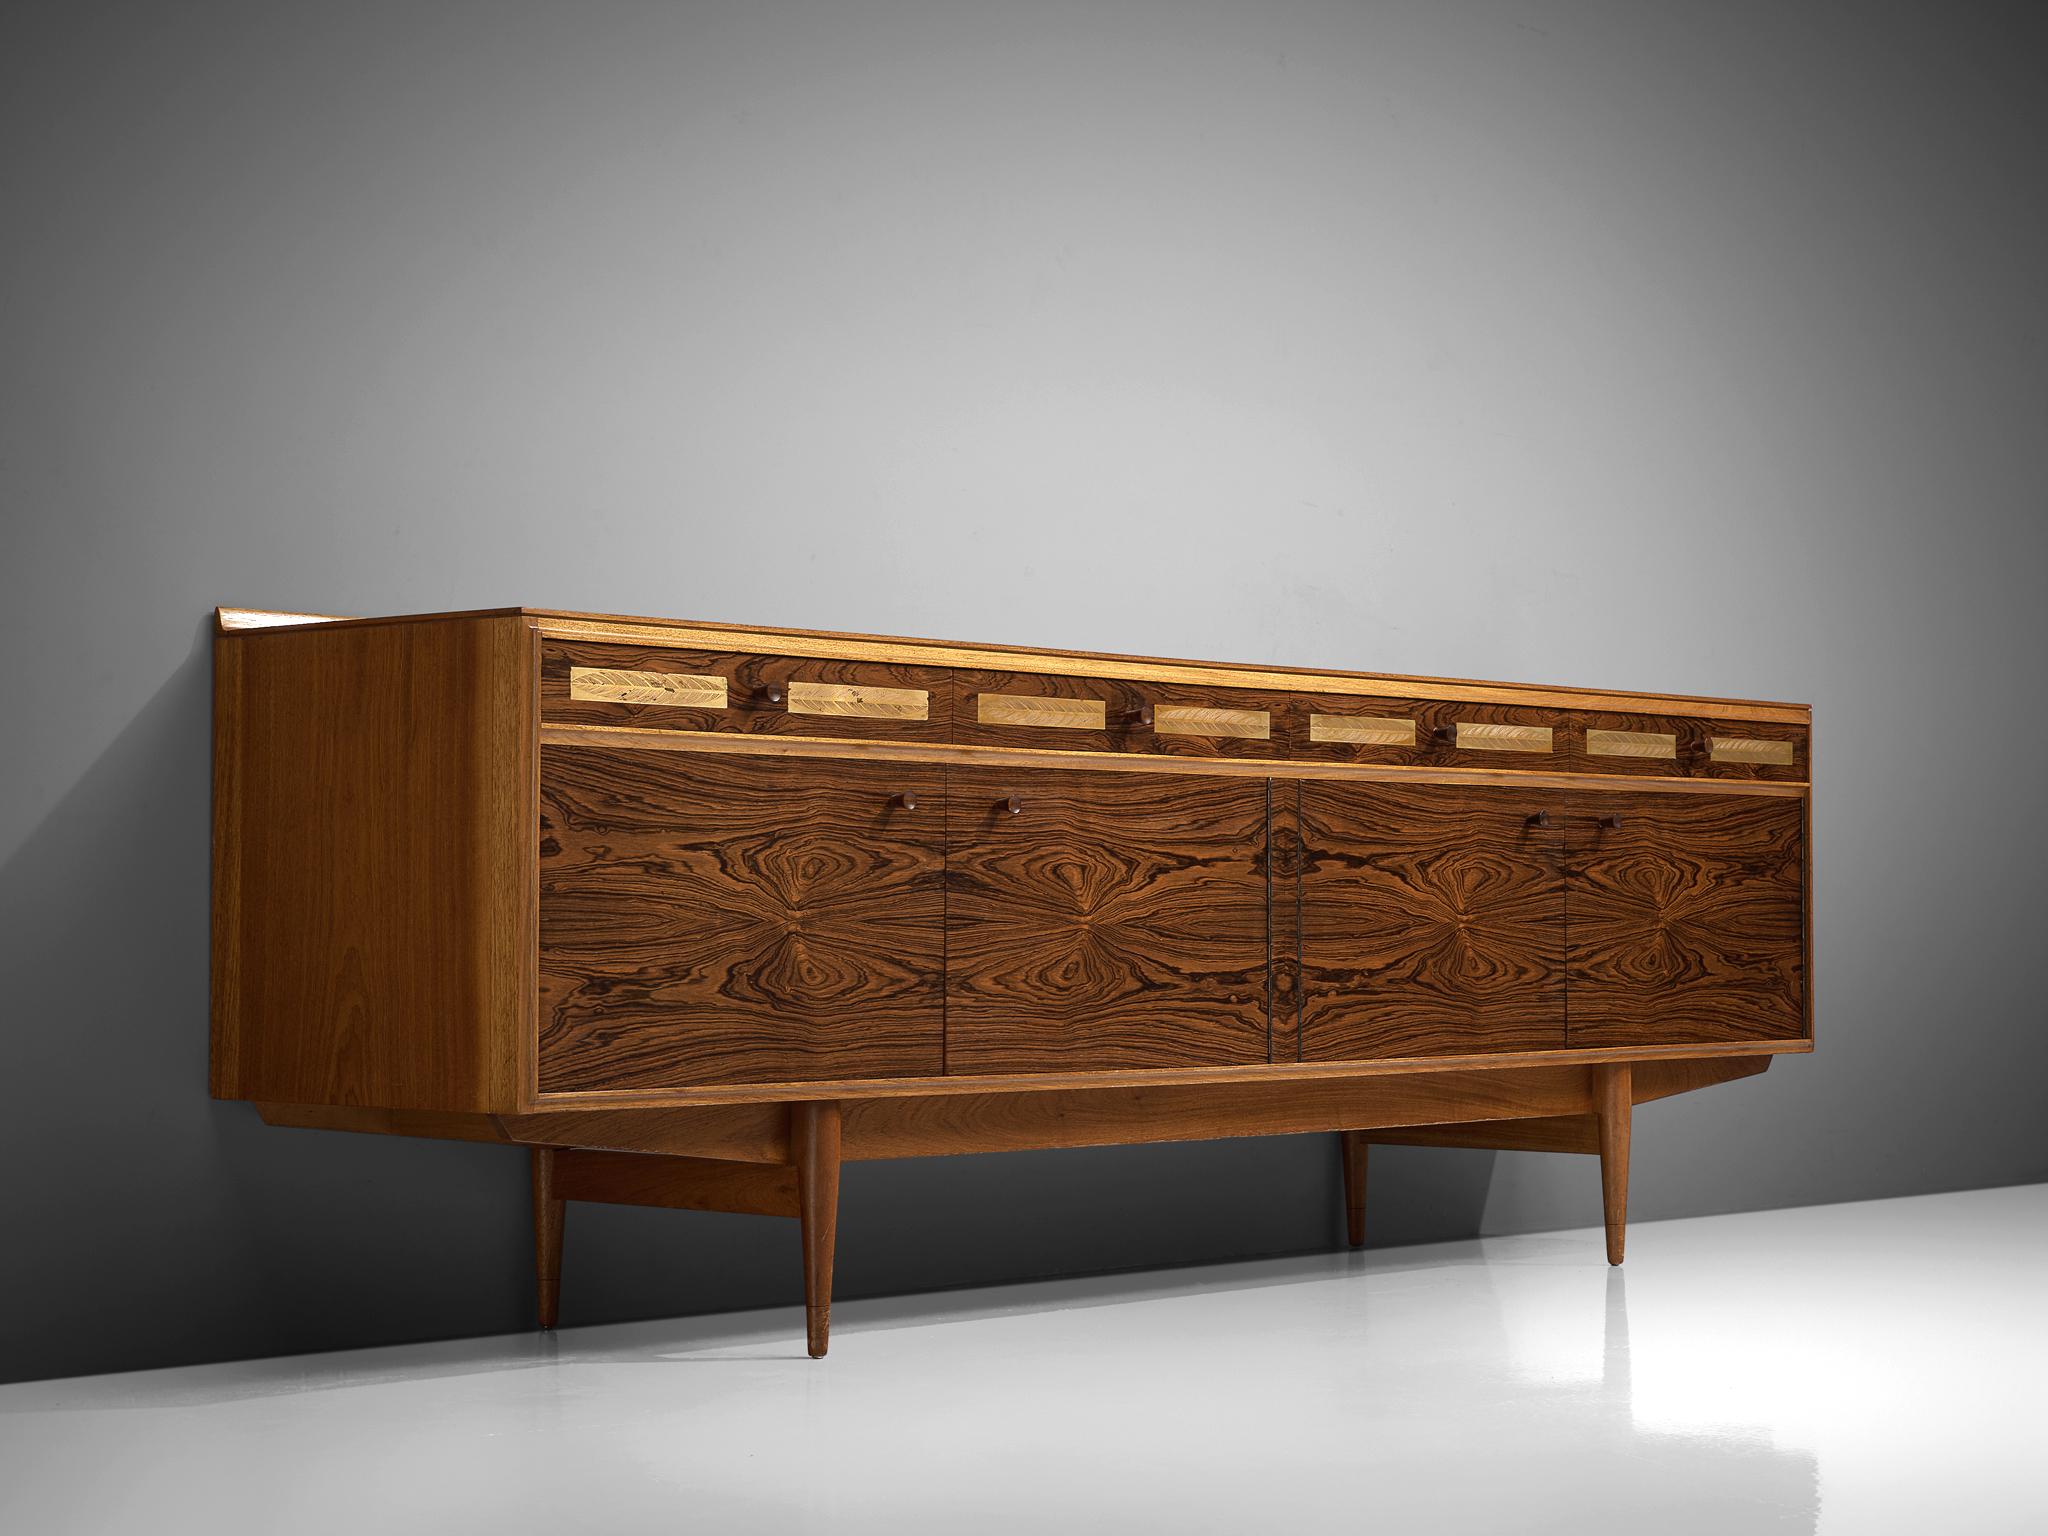 Sideboard, rosewood and walnut, Denmark, 1950s.

This sideboard is well-constructed and detailed in a discrete manner. Produced in rosewood and walnut. The piece shows well-designed lines and interesting details, such as brass strips with